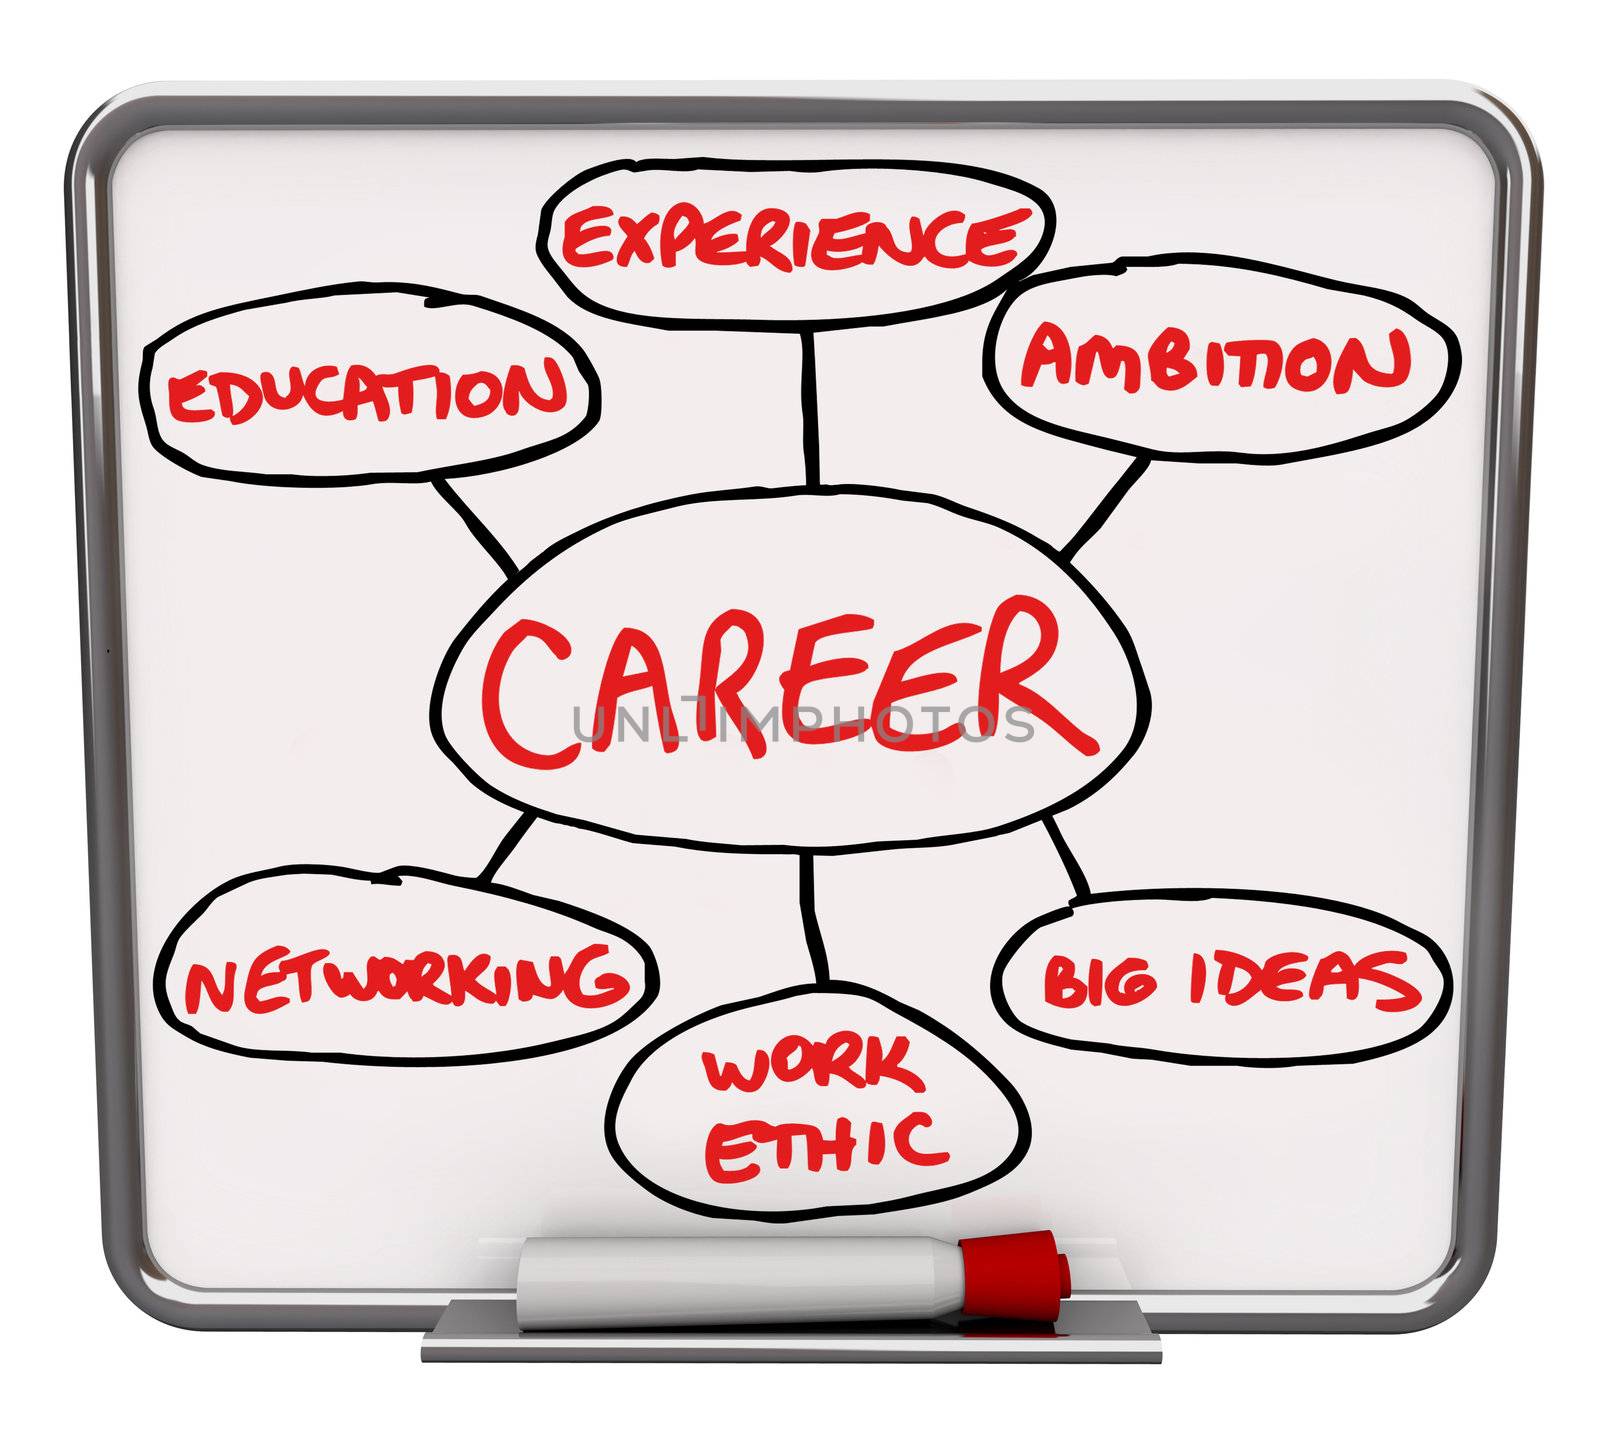 A white dry erase board with red marker, with an illustrated diagram showing the different elements that go into having a successful career or succeeding in your job